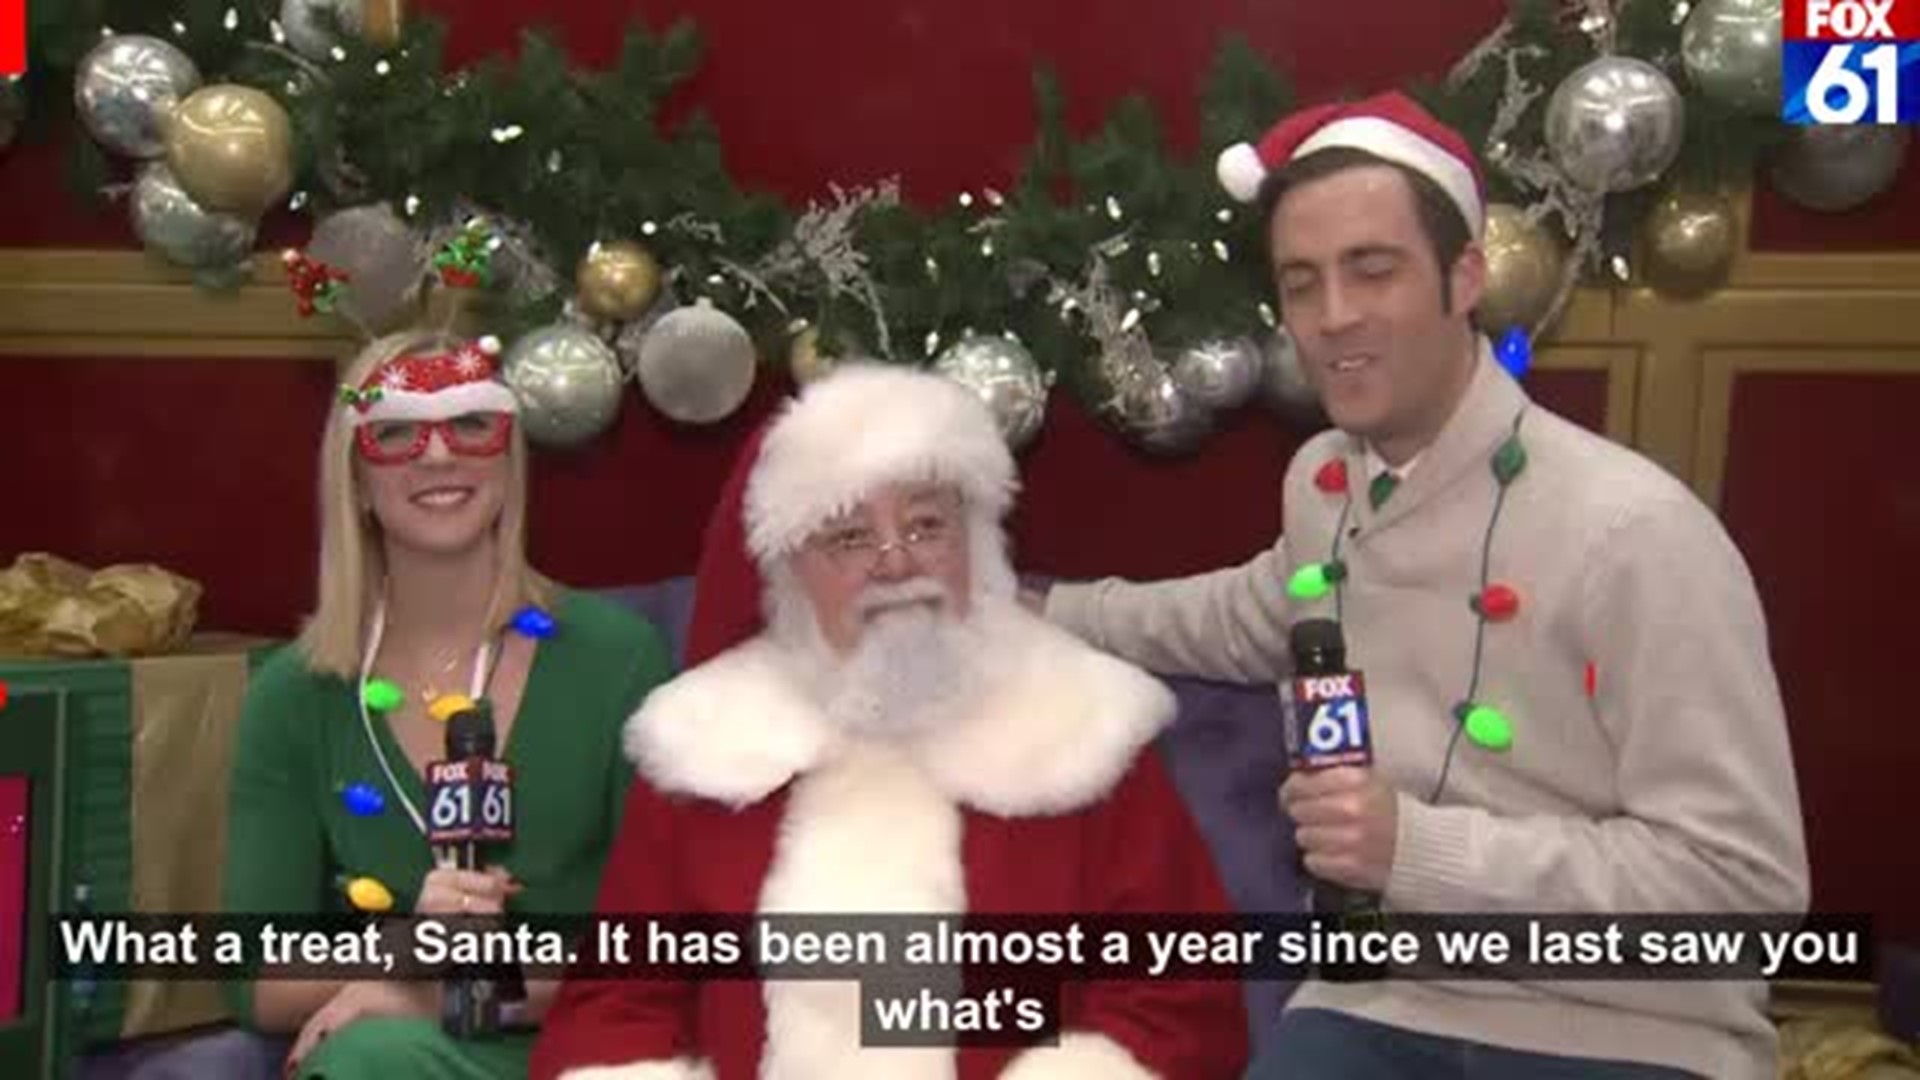 FOX61 Exclusive Interview with SANTA